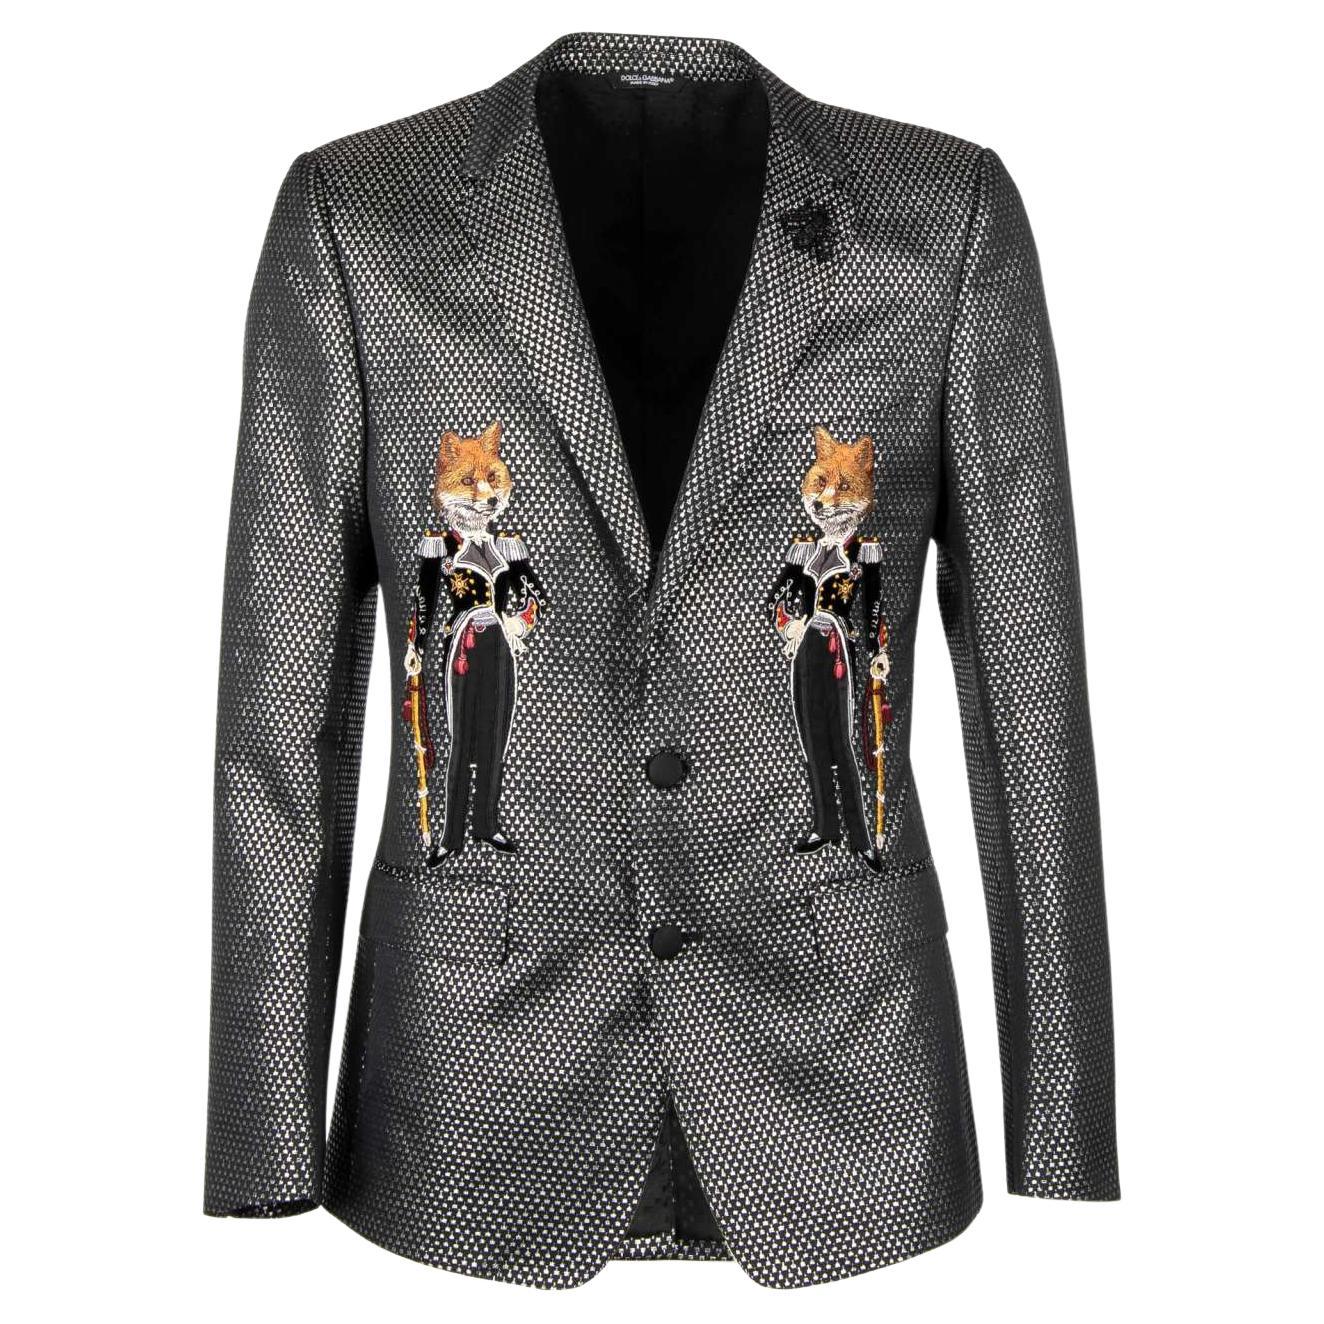 D&G Lurex Tuxedo Blazer MARTINI with Foxes and Bee Embroidery Silver 44 For Sale